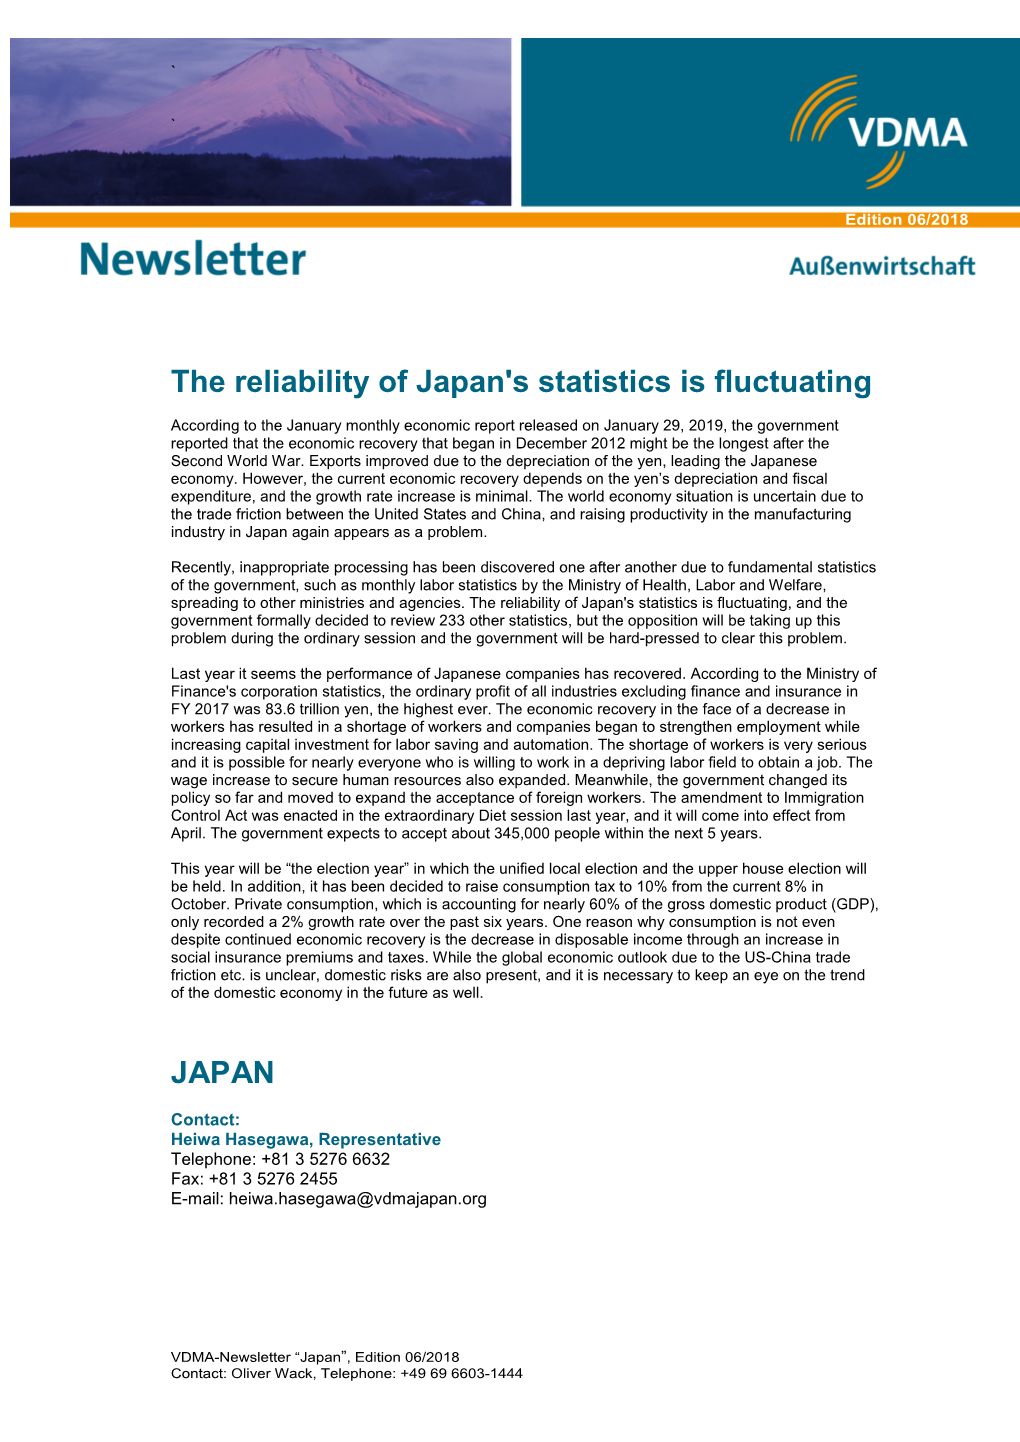 The Reliability of Japan's Statistics Is Fluctuating